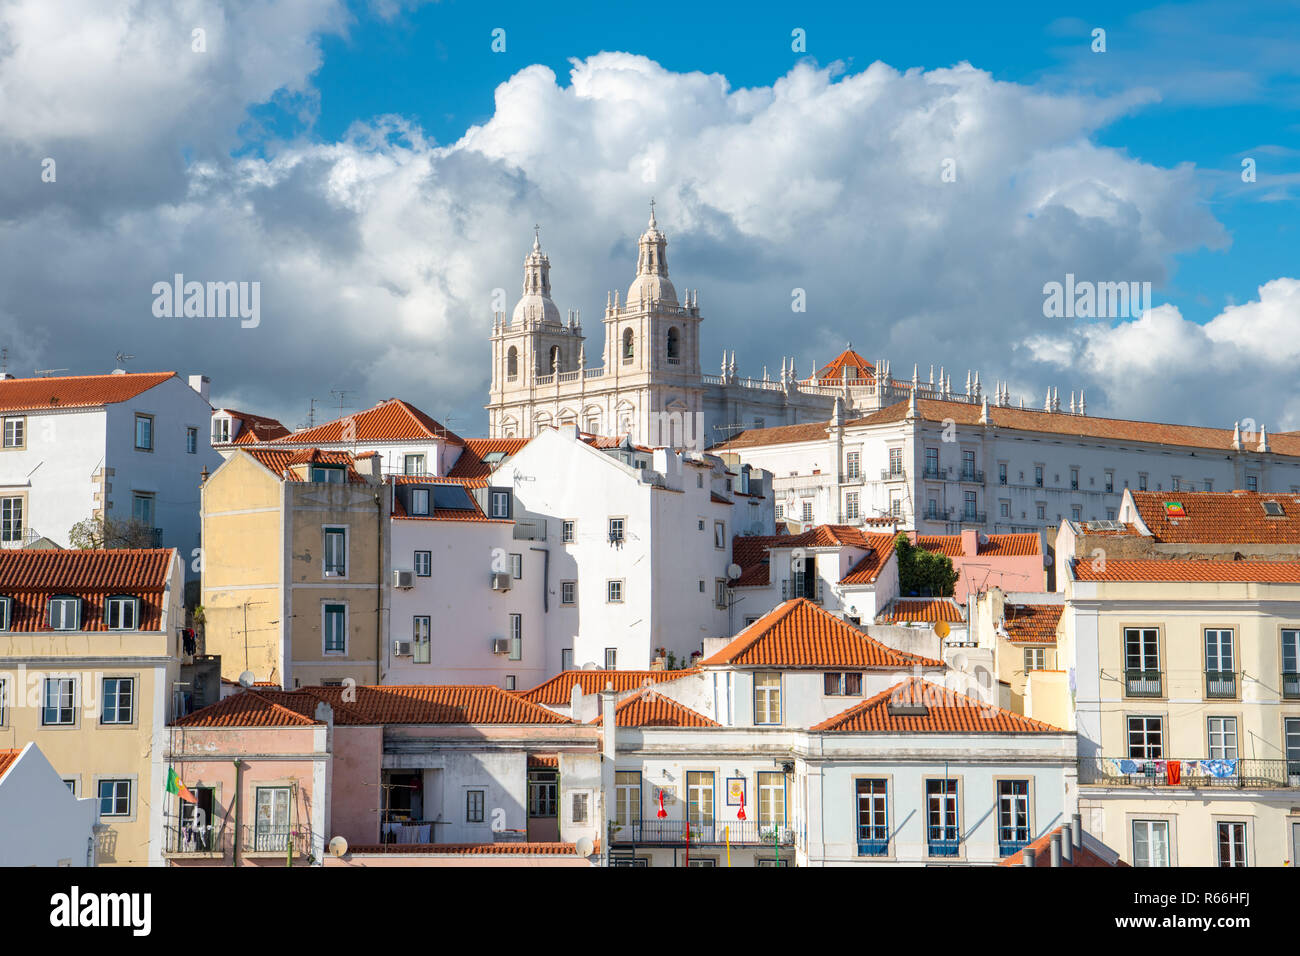 Mosteiro de Sao Vicente de Fora church and monastery above the red tile roofs and colorful buildings of the Alfama district in Lisbon, Portugal Stock Photo